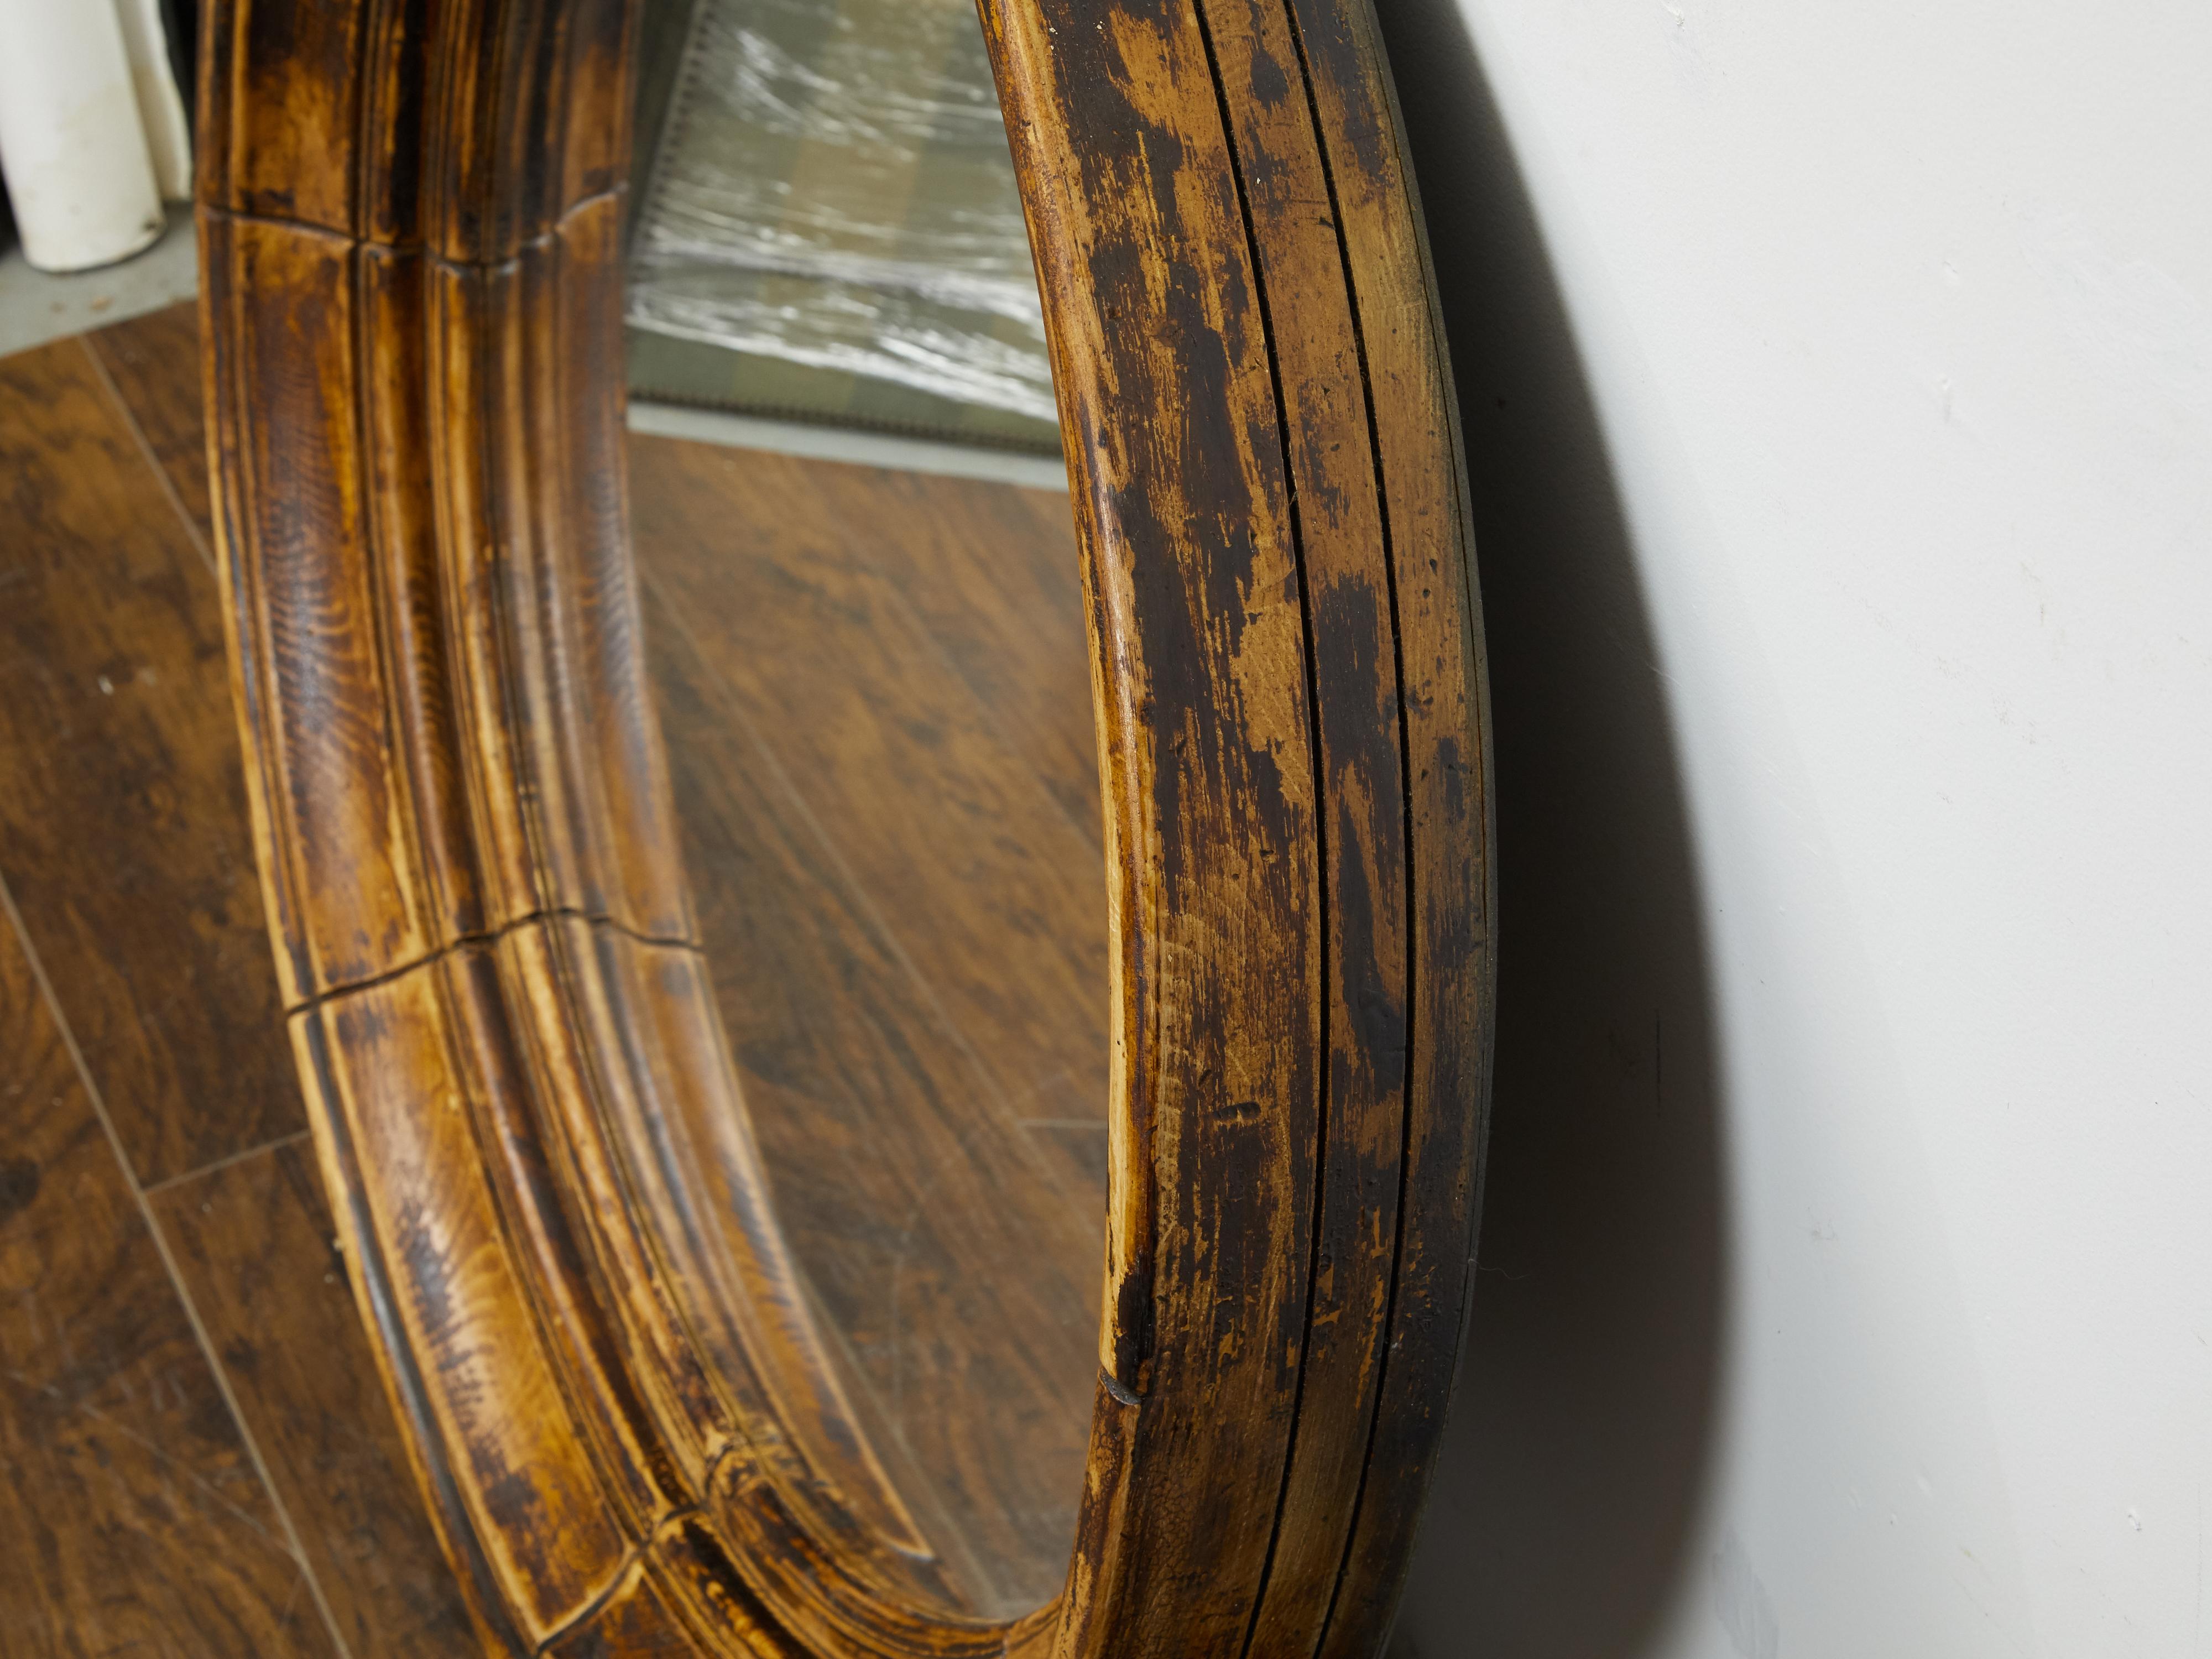 An English pine mirror from the mid 20th century, with distressed finish. Created in England during the midcentury period, this pine mirror charms us with its circular frame boasting a nicely weathered appearance. Made of radiating sections, this